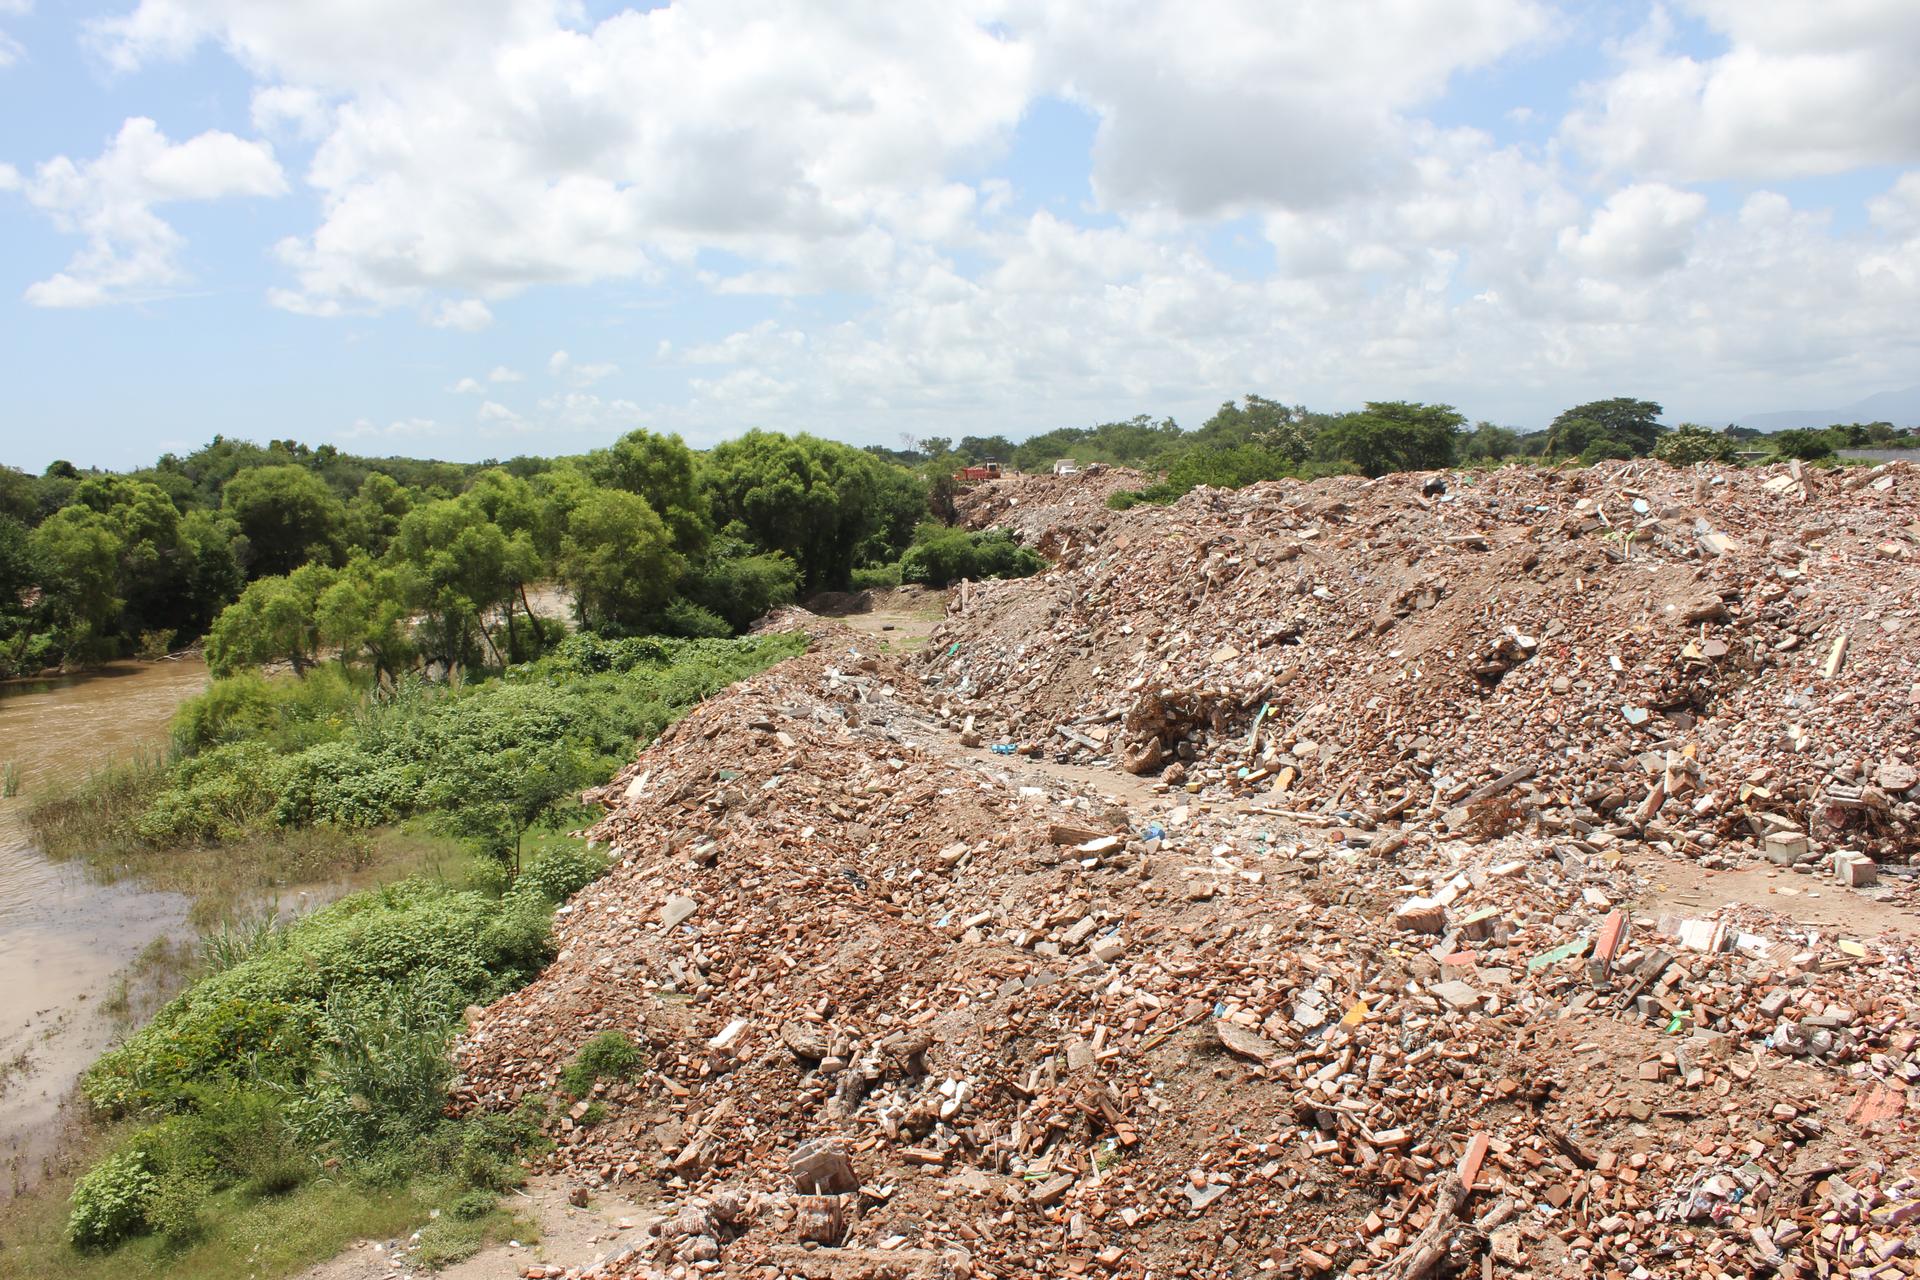 dumping thousands of tons of unsorted rubble along the banks of the Los Perros River in Ixtaltepec